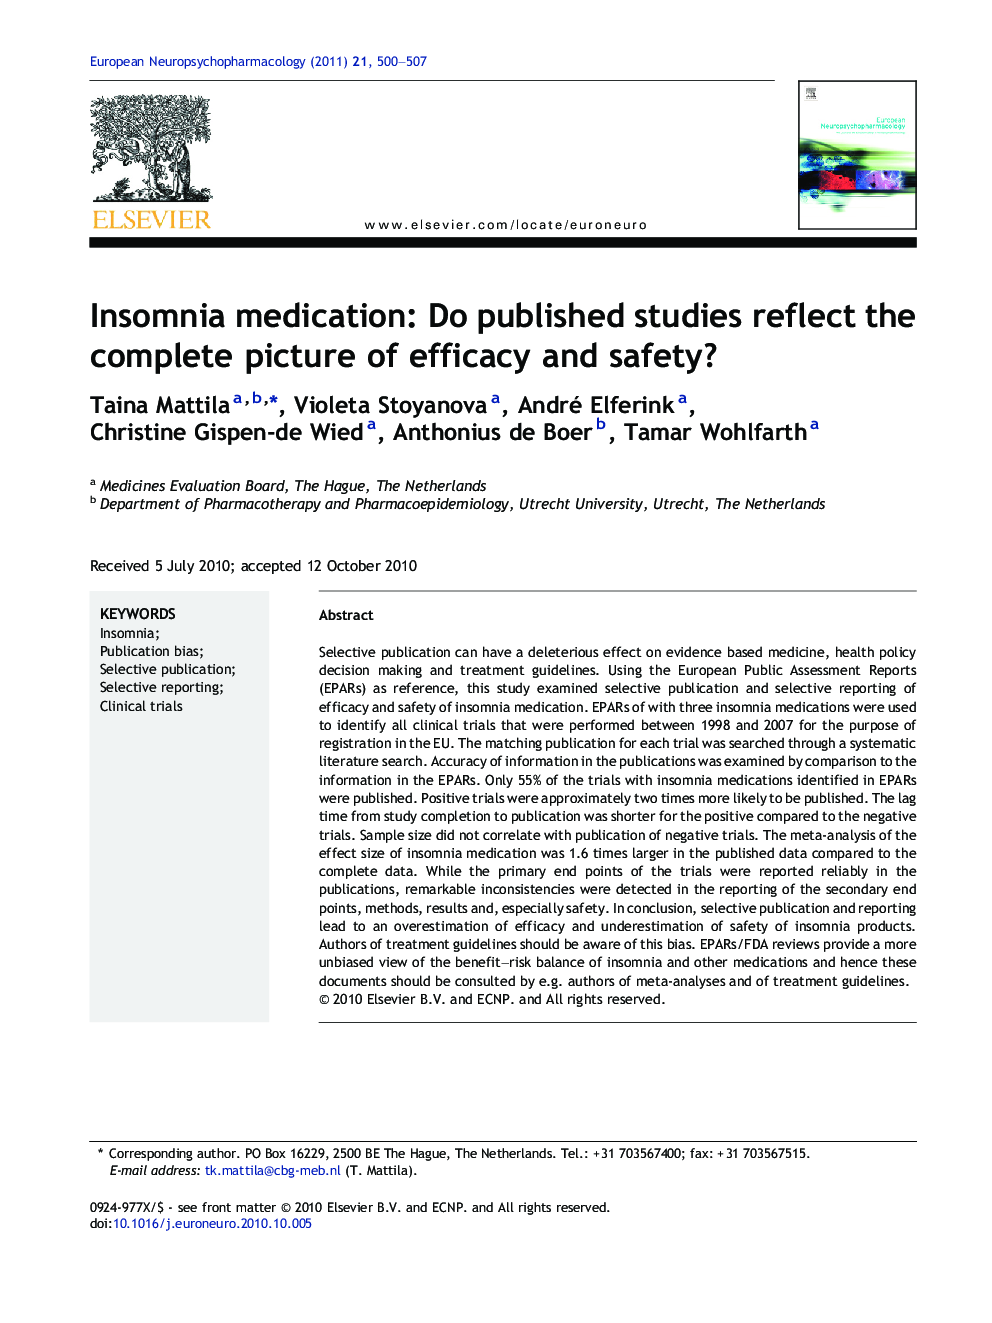 Insomnia medication: Do published studies reflect the complete picture of efficacy and safety?